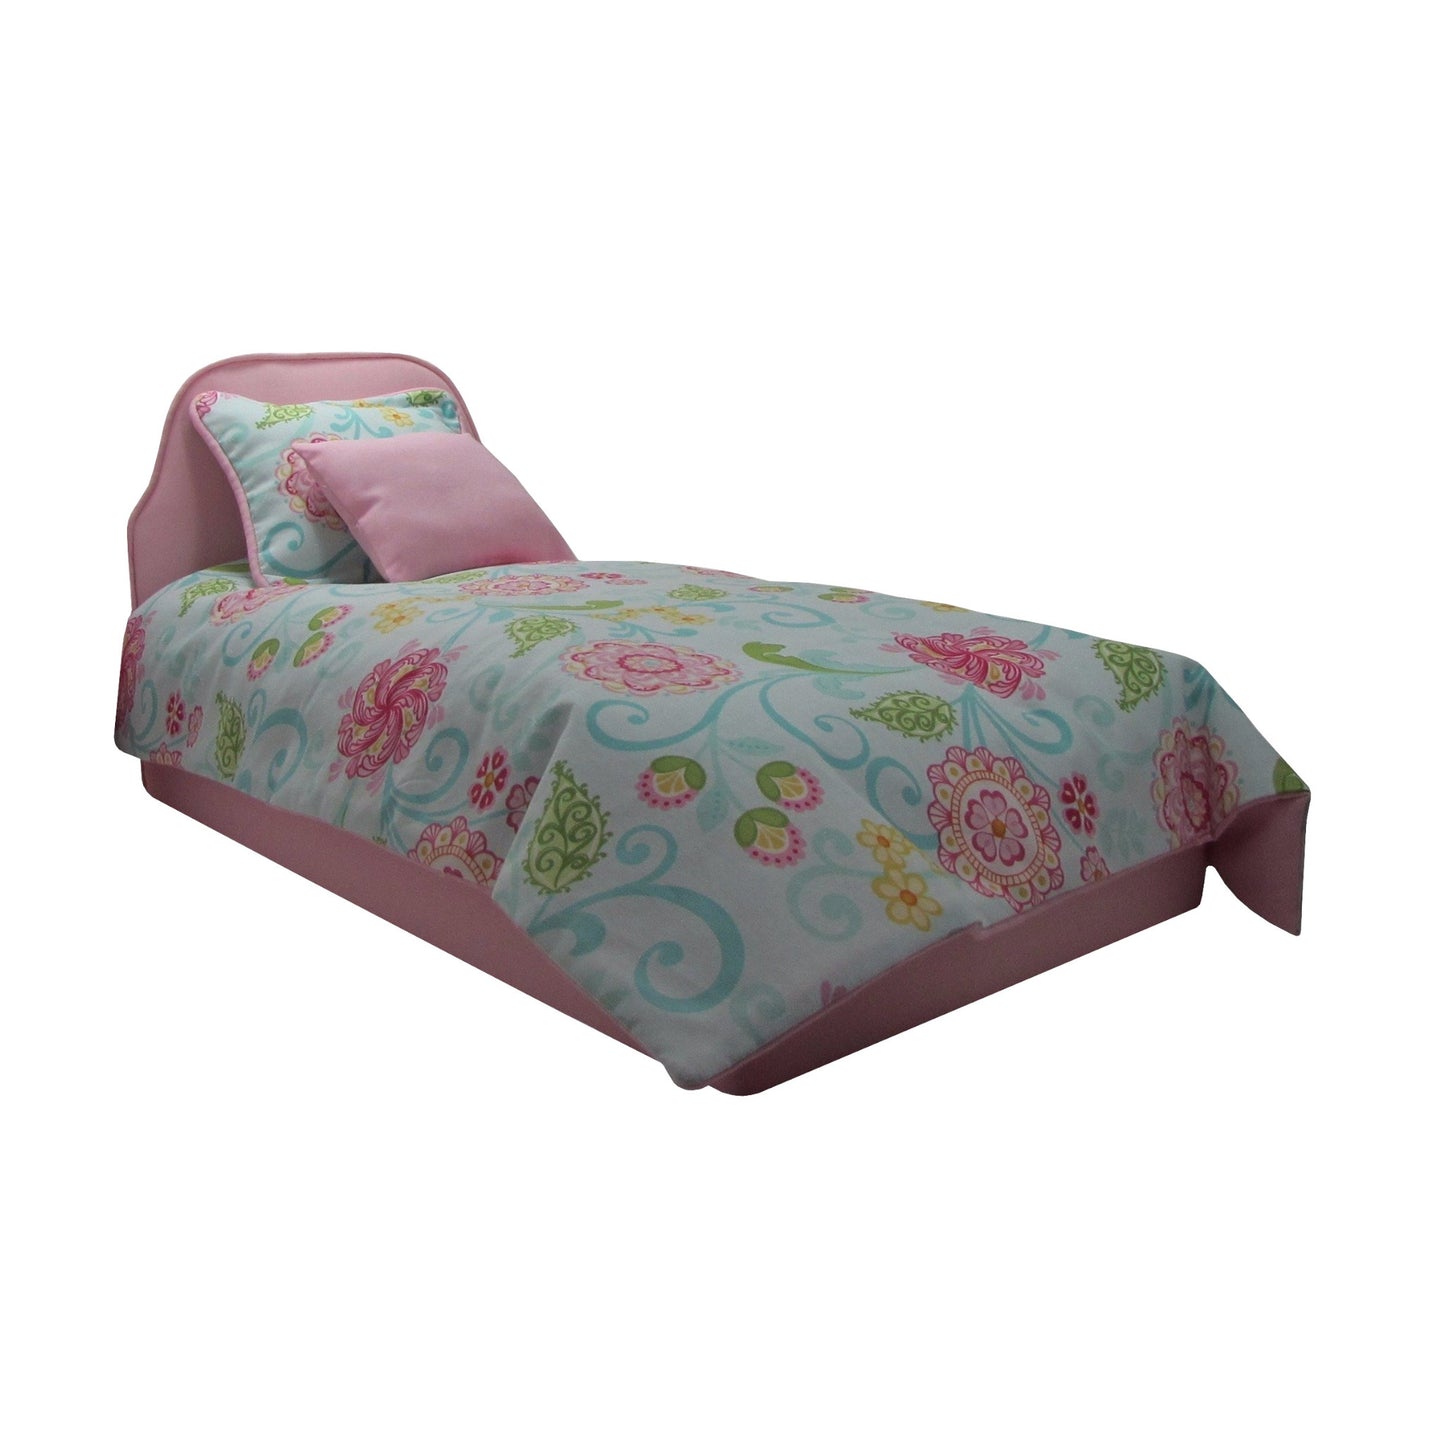 Pink Floral Doll Bedding for 18-inch dolls